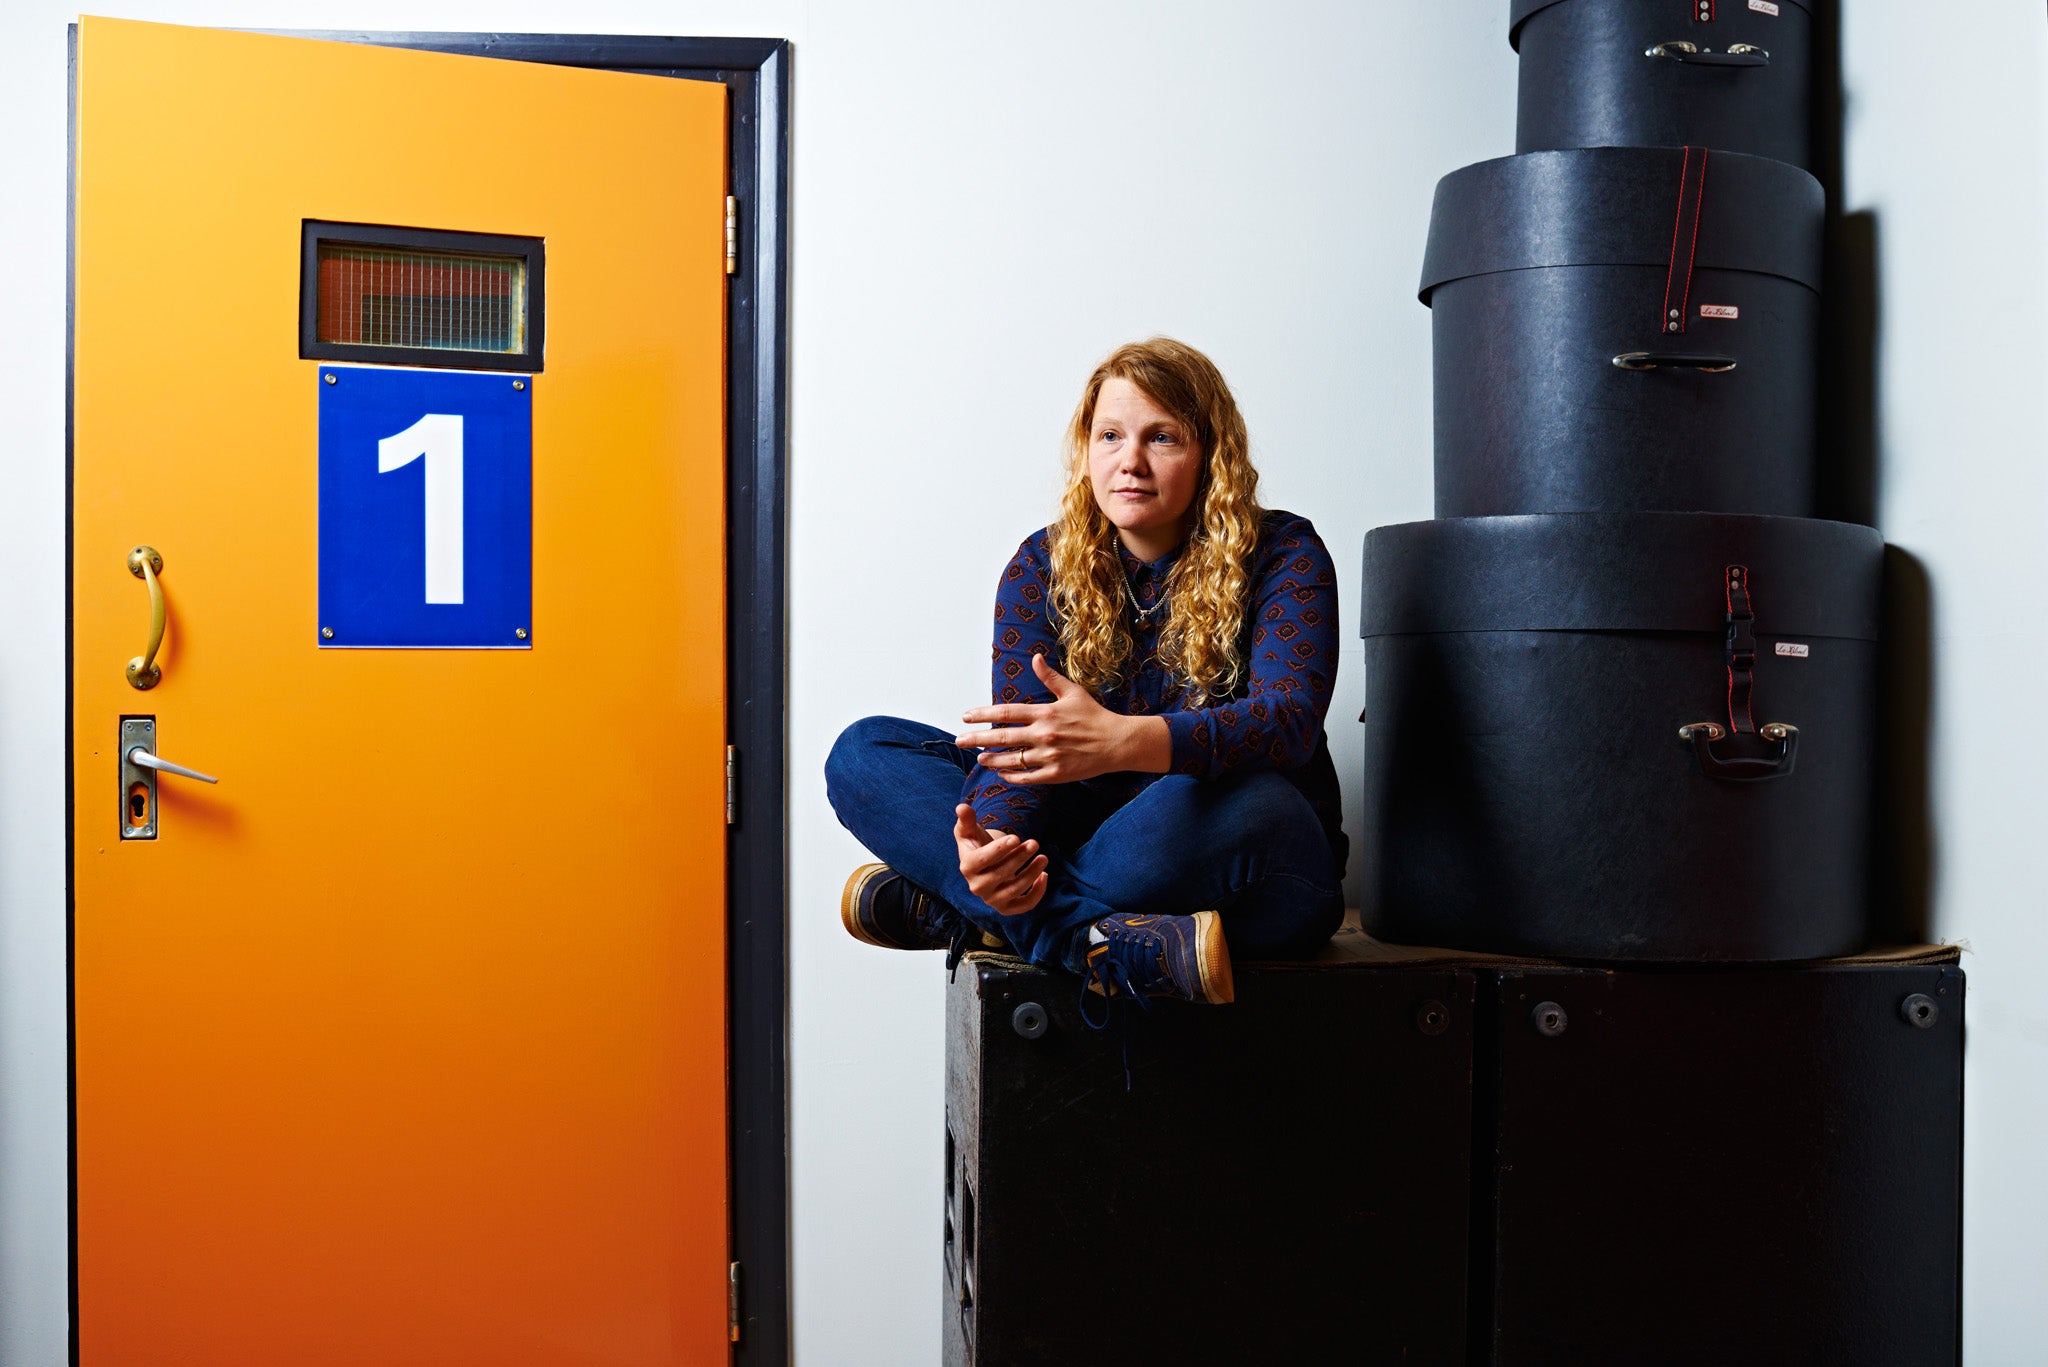 Award-winning poet Kate Tempest unleashes hip-hop album | The Independent | The